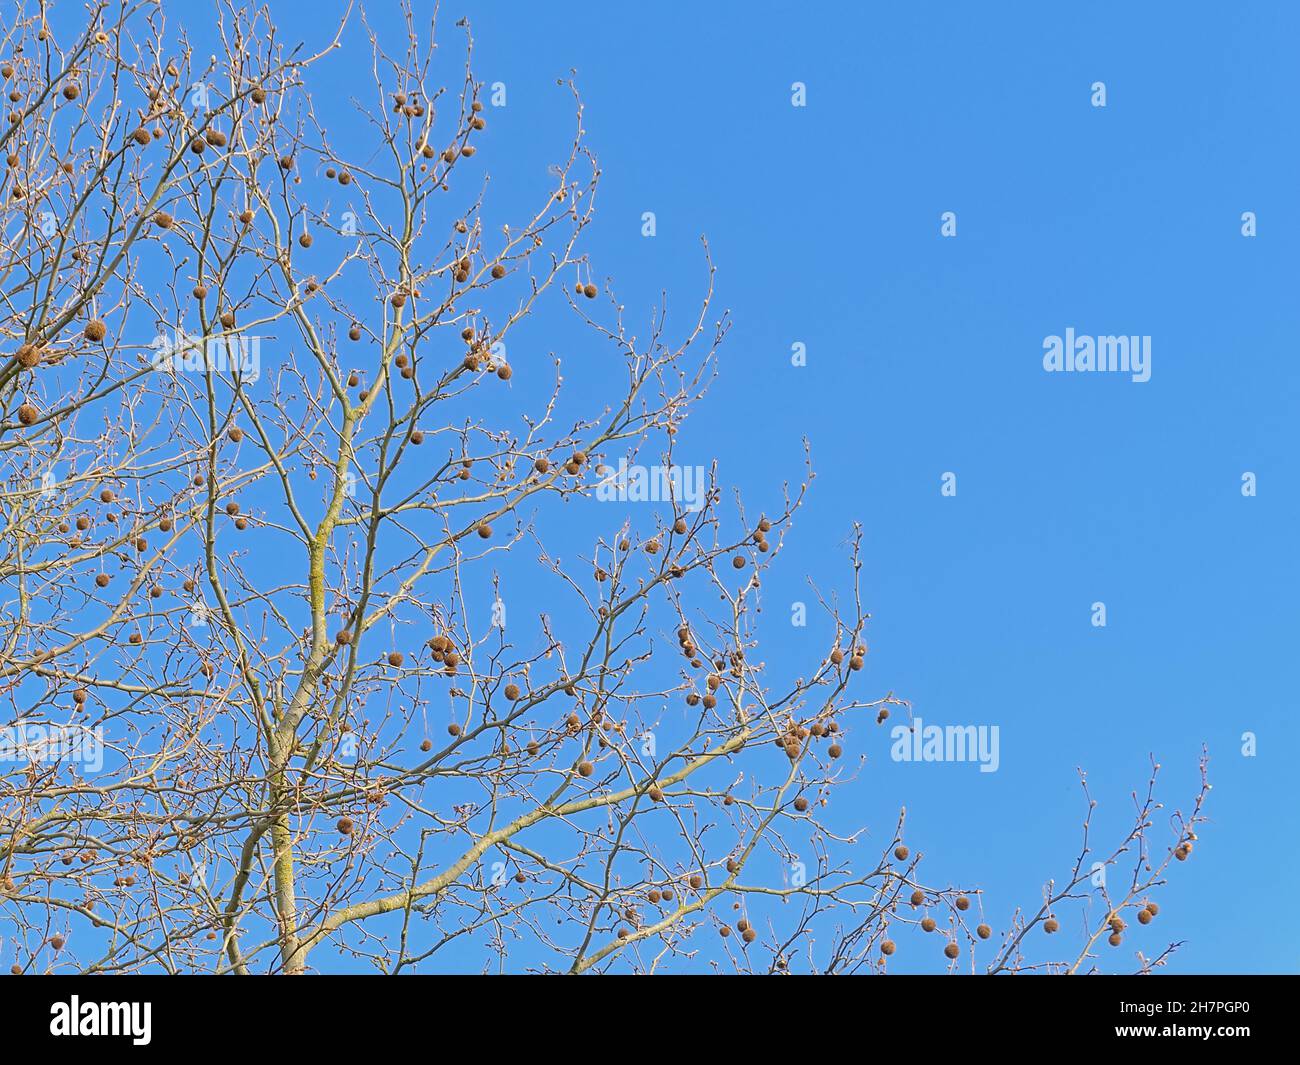 Bare platanus branches with dried brown fruits on a clear blue sky Stock Photo